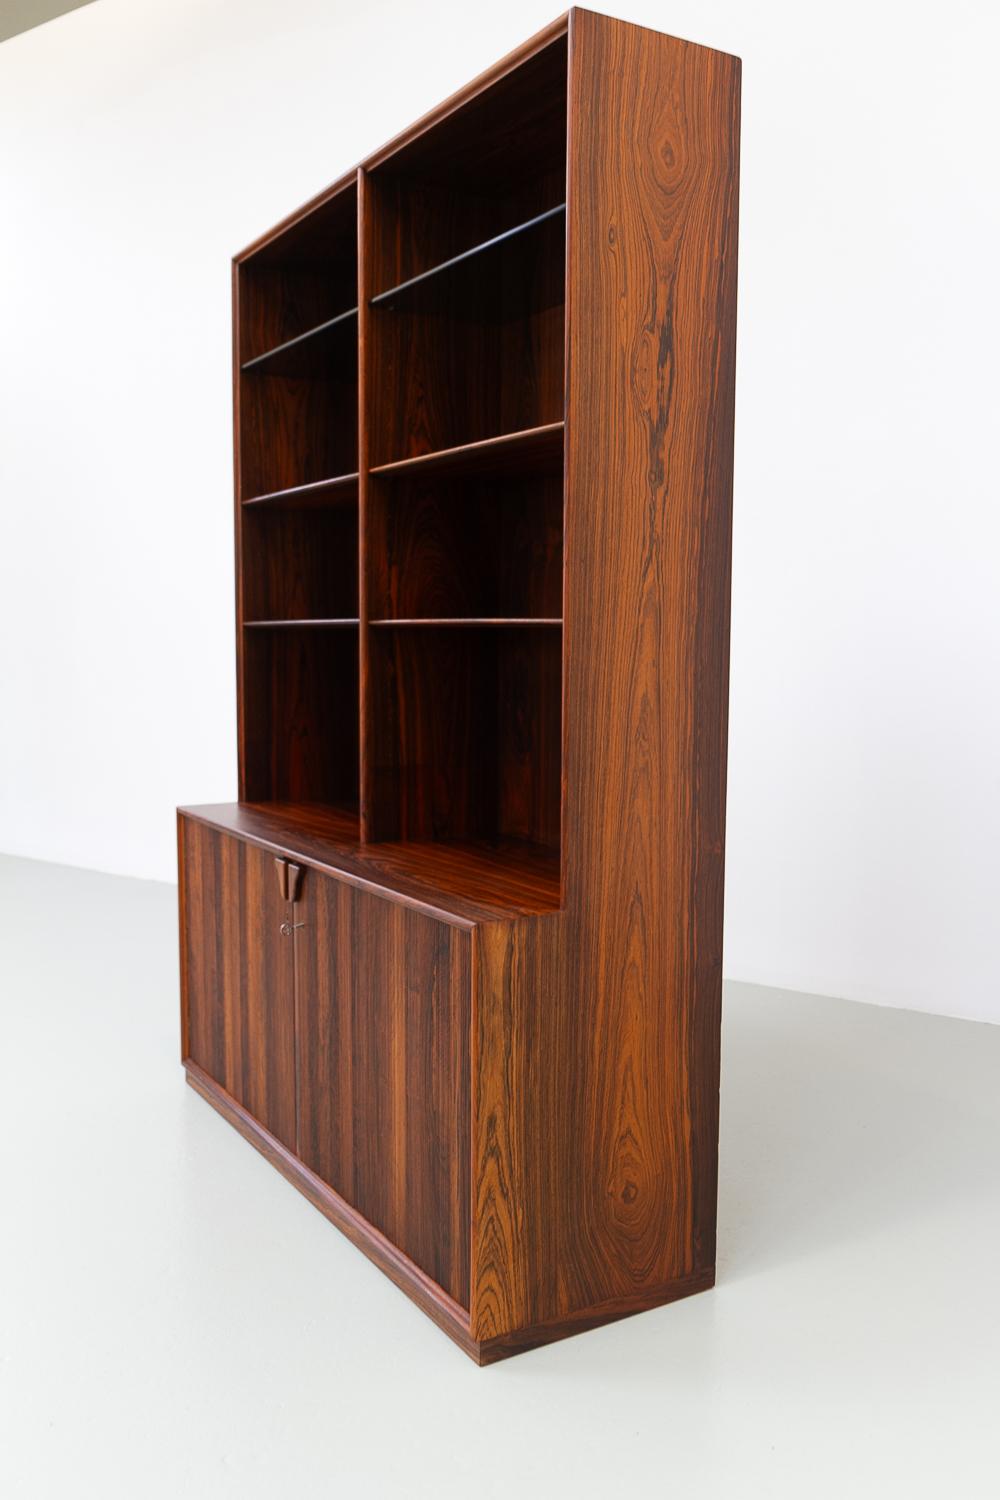 Mid-20th Century Danish Modern Rosewood Bookcase by Frode Holm for Illums, 1950s. For Sale